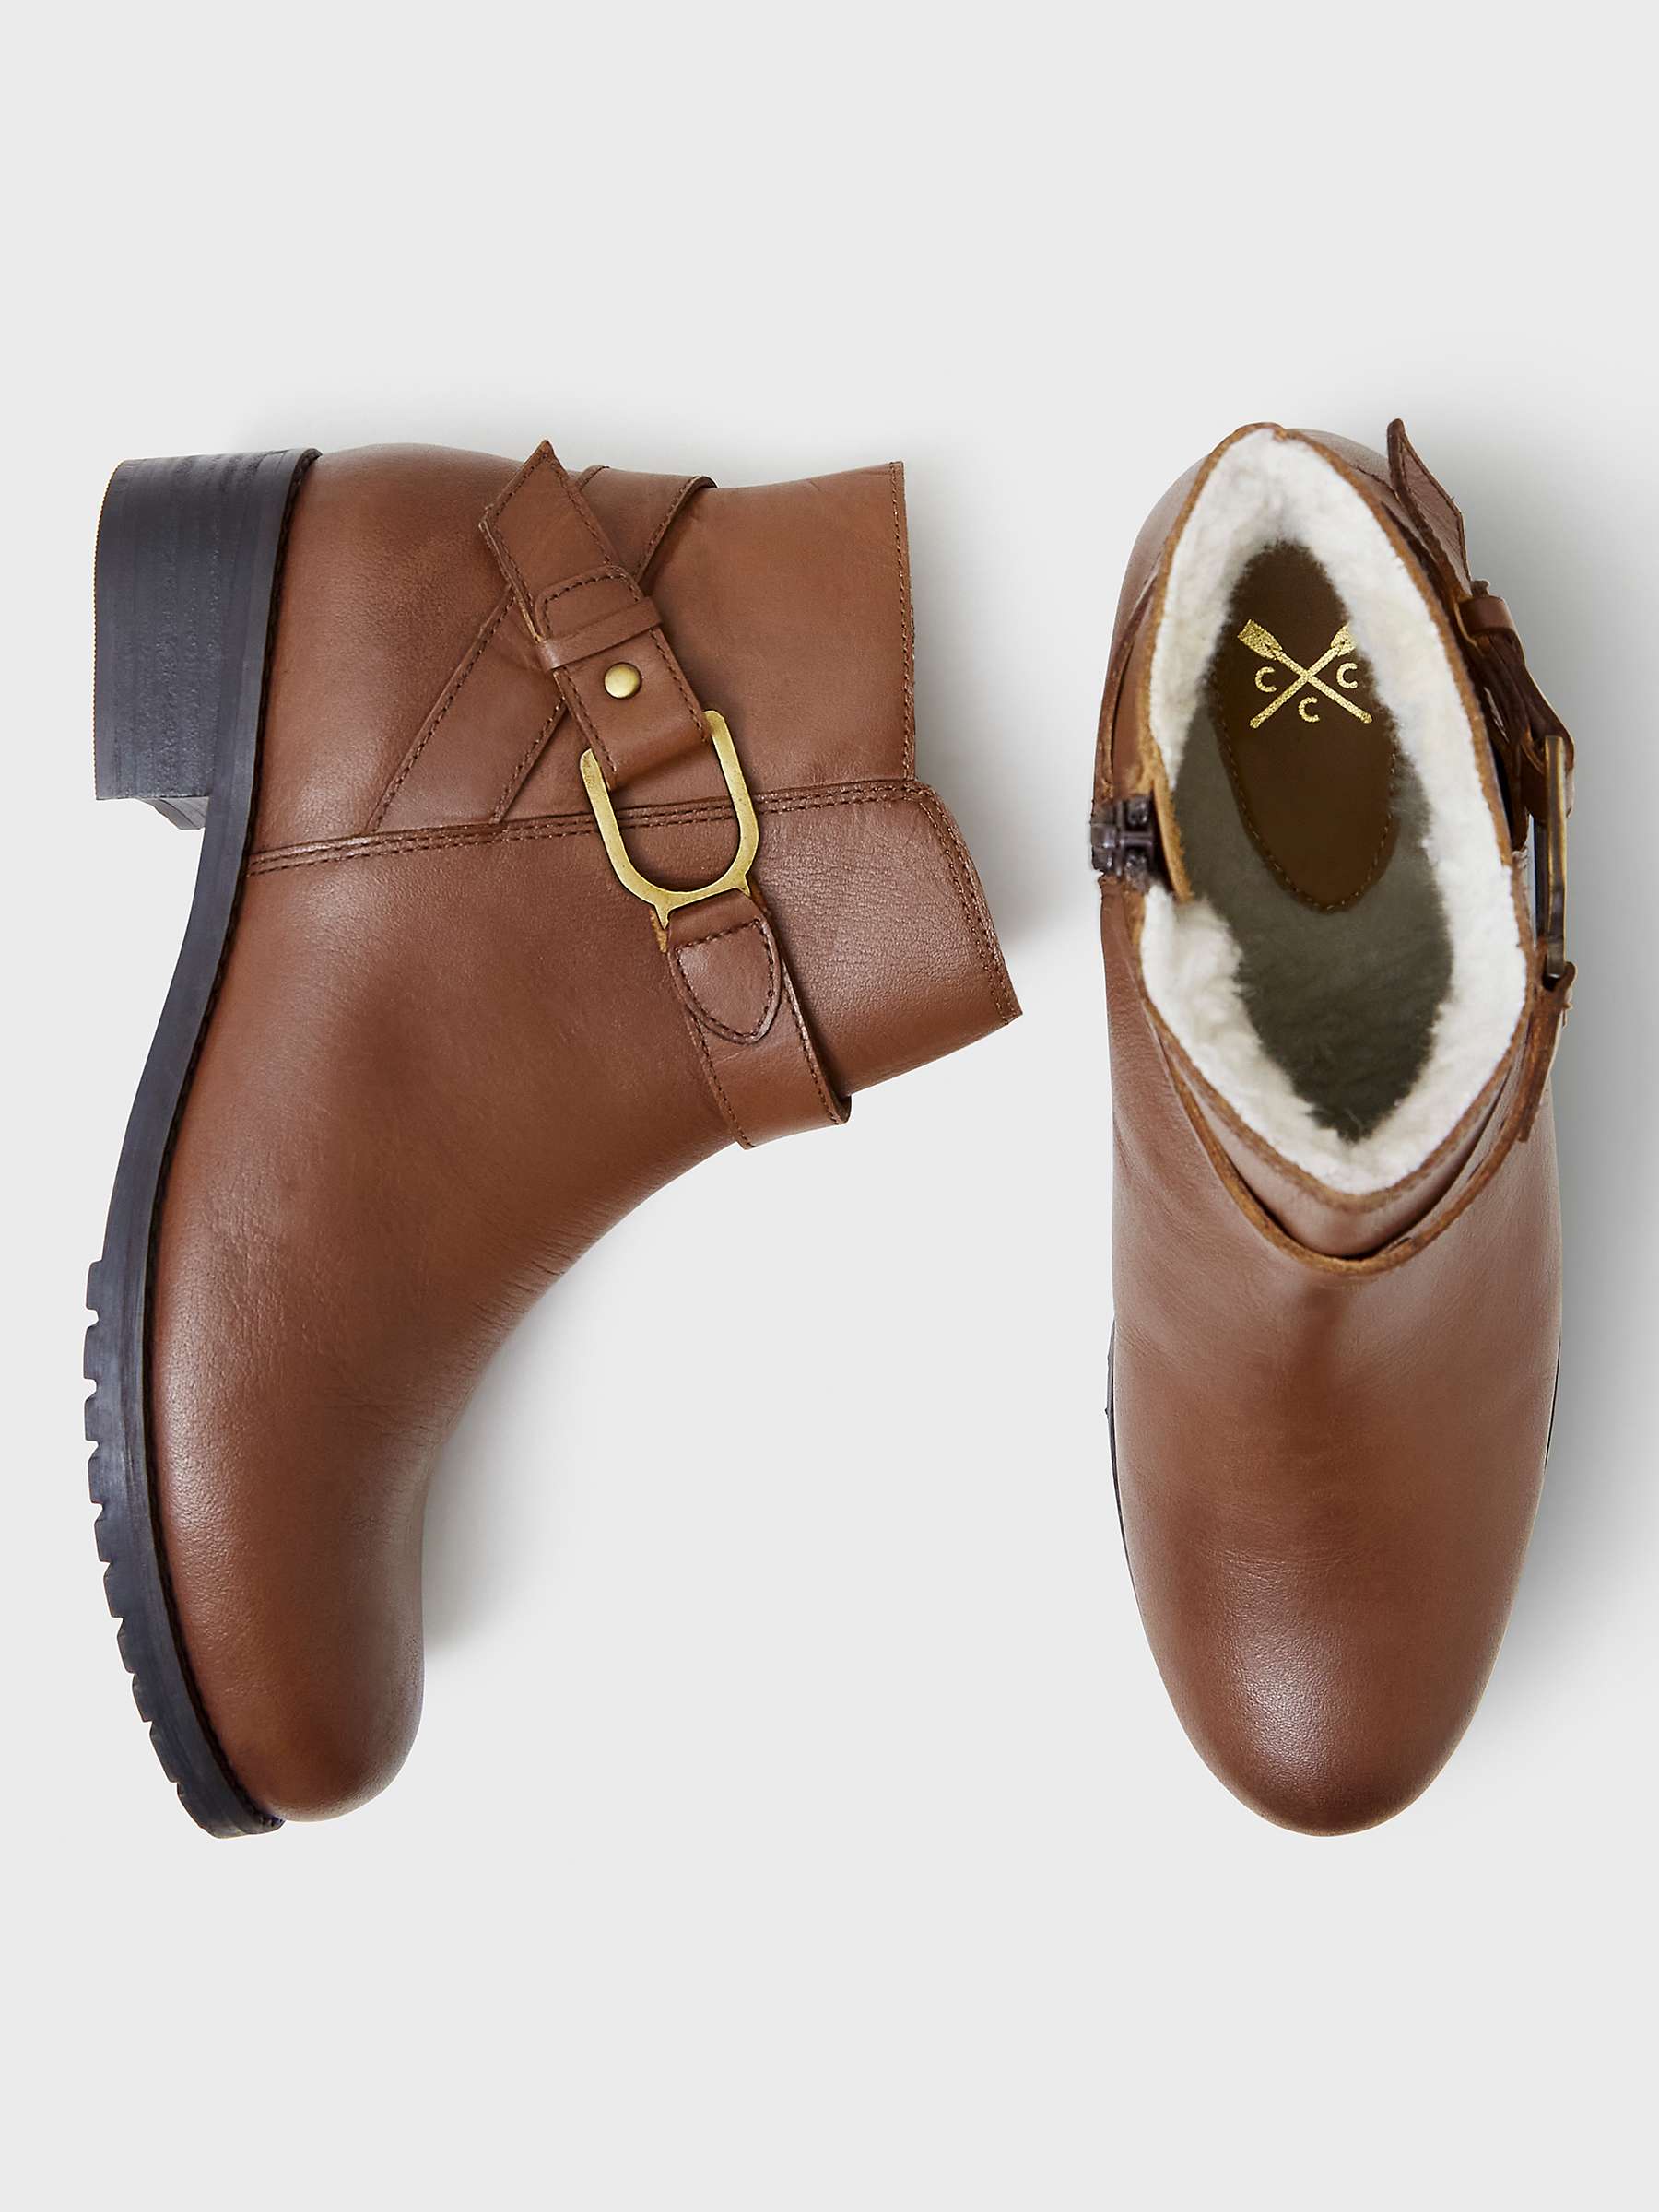 Buy Crew Clothing Lucy Borg Lined Leather Boots, Chocolate Brown Online at johnlewis.com